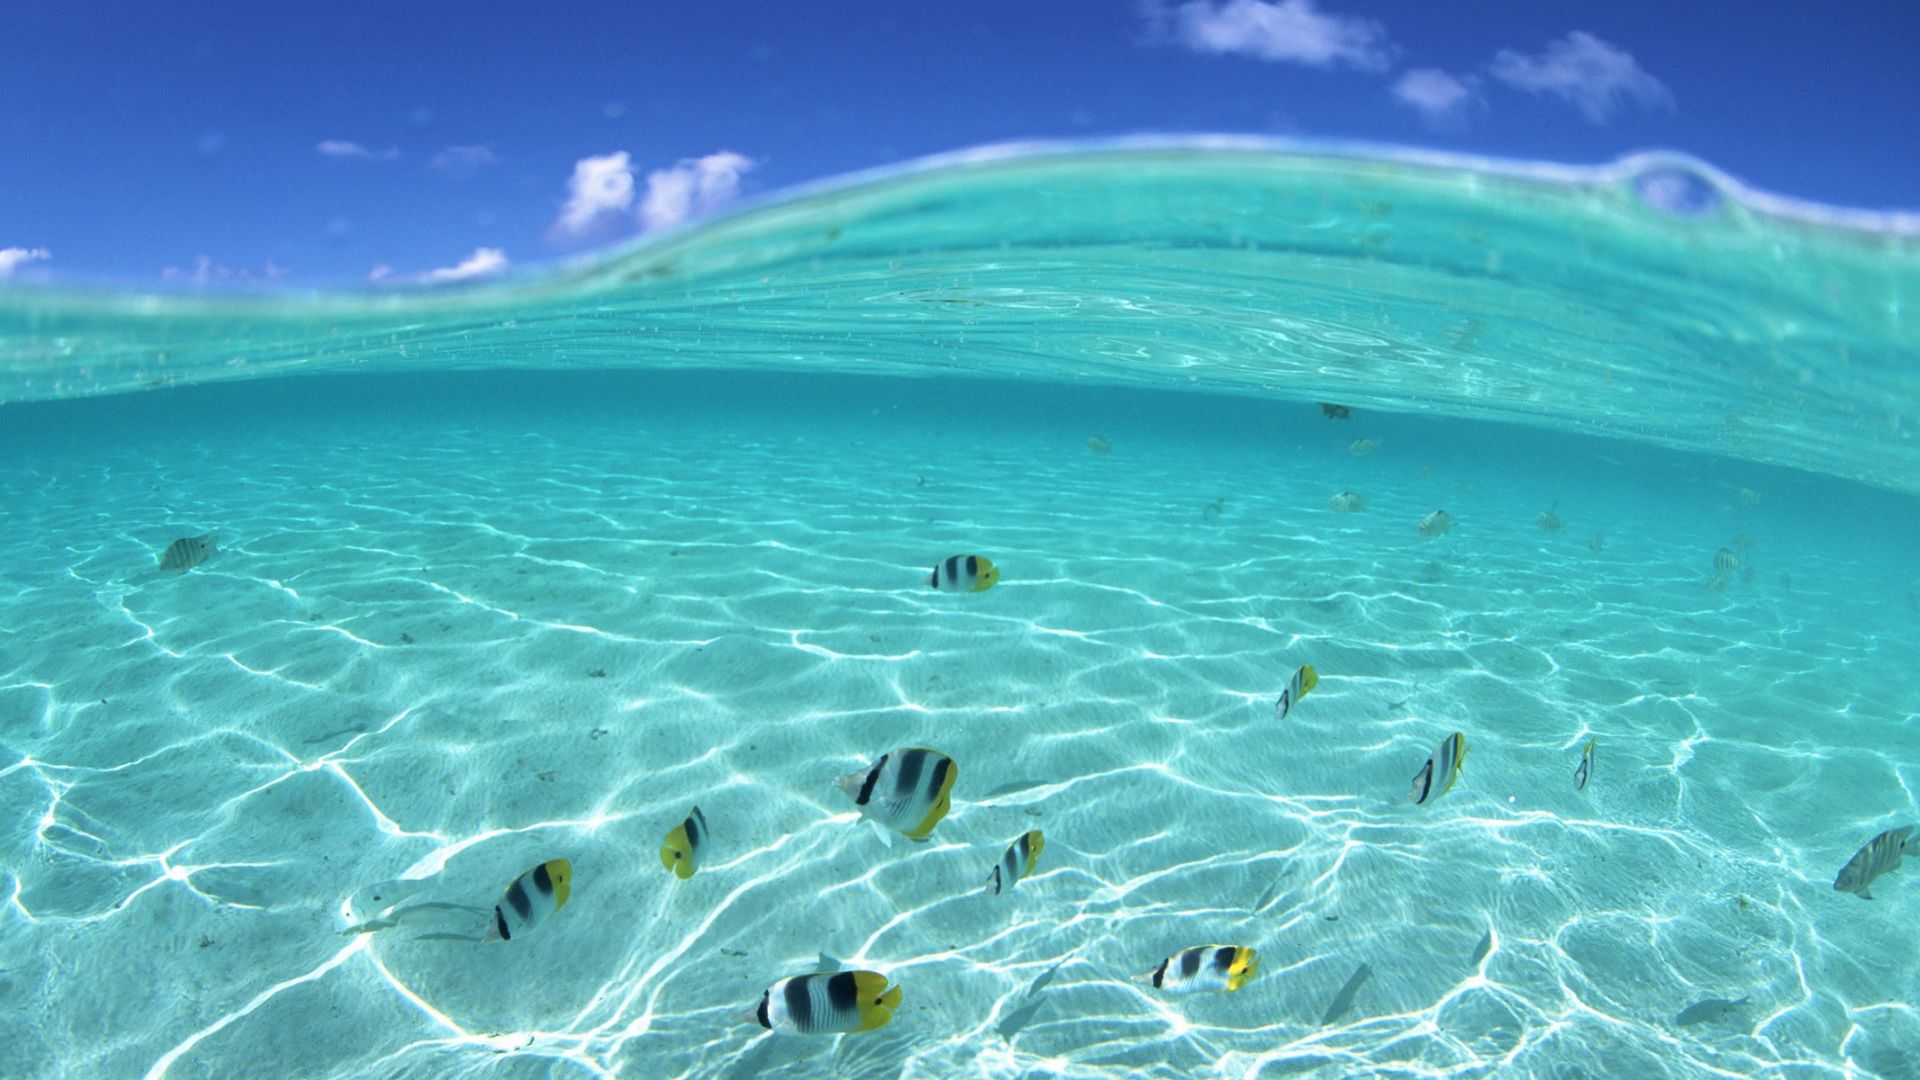 Wallpapers Underwater Fish In Hawaii Resolution Free 1920x1080